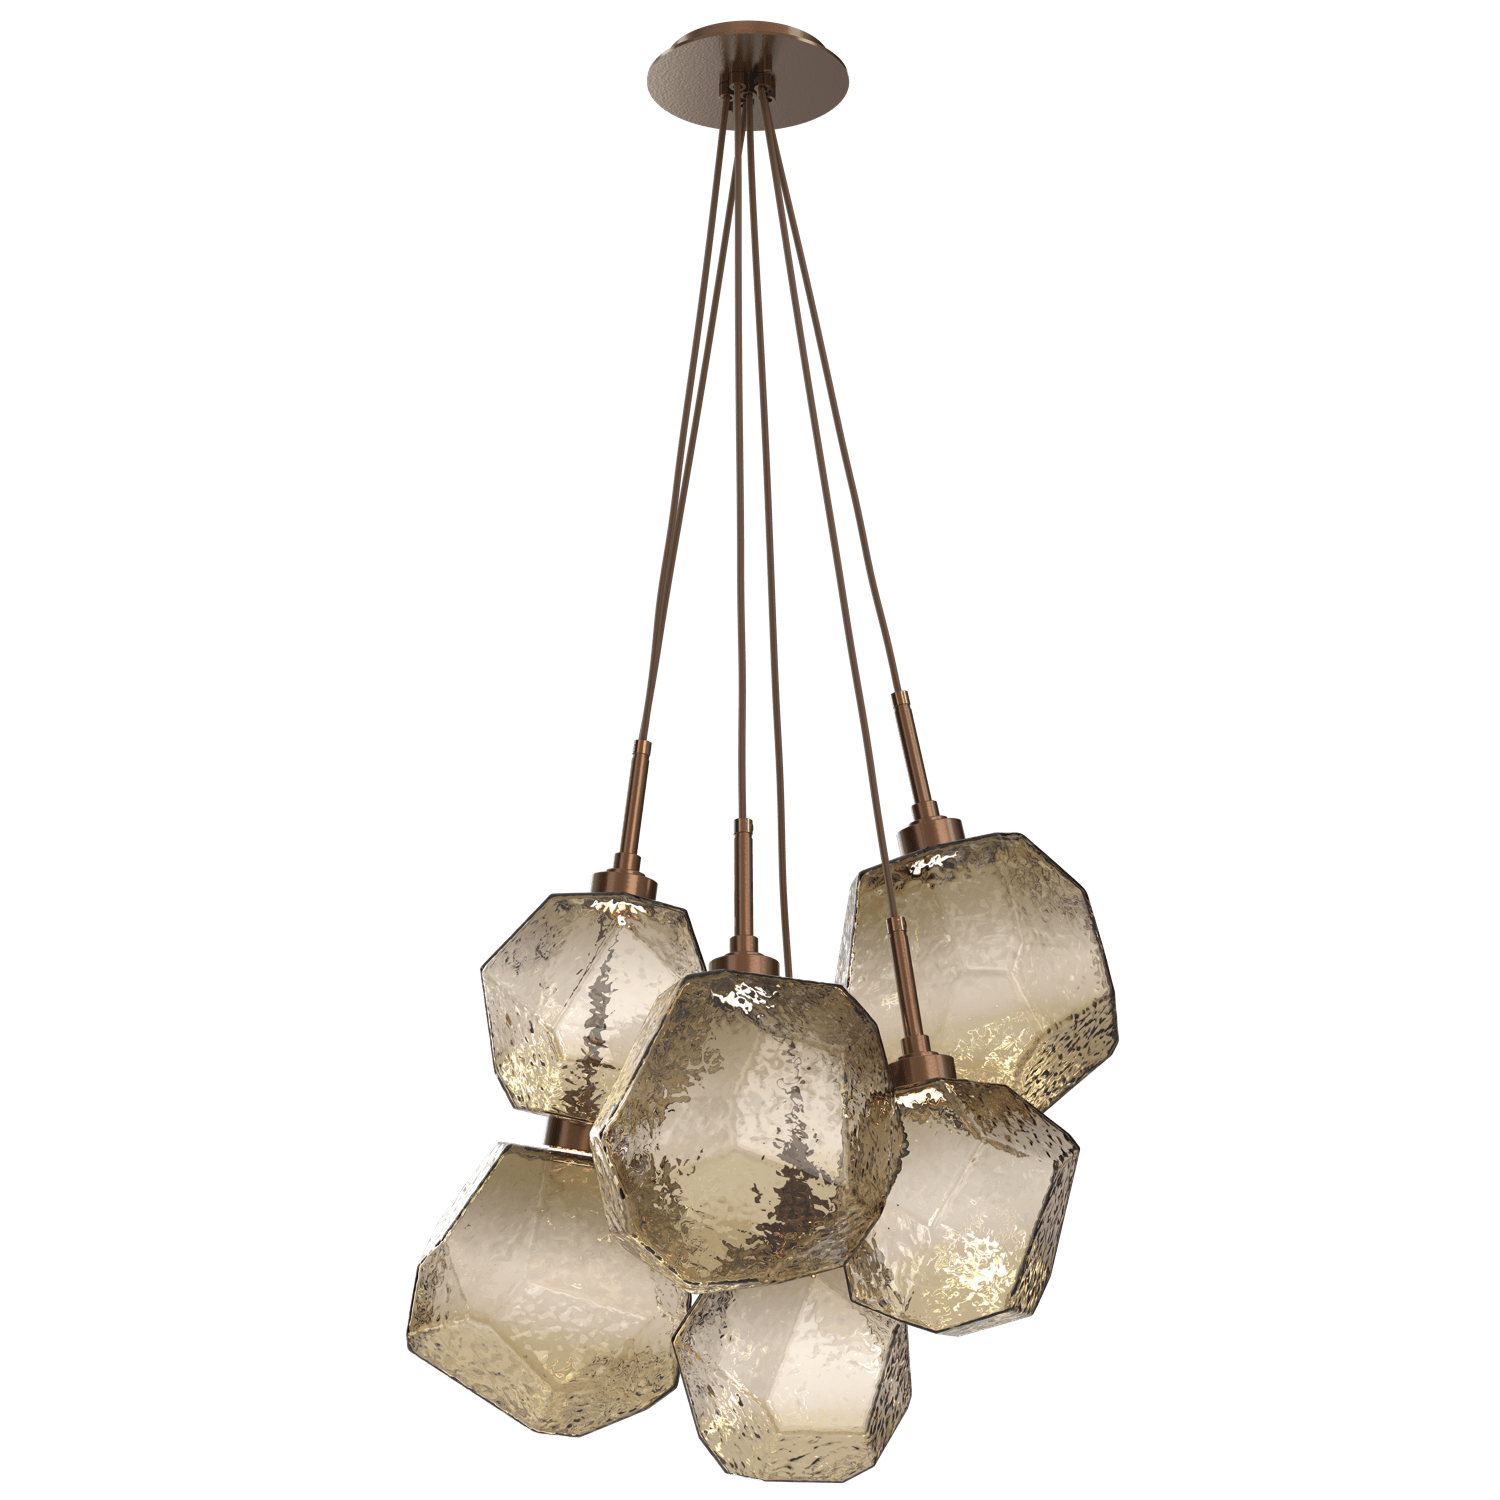 CHB0039-0F-BB-B-Hammerton-Studio-Gem-6-light-cluster-pendant-light-with-burnished-bronze-finish-and-bronze-blown-glass-shades-and-LED-lamping